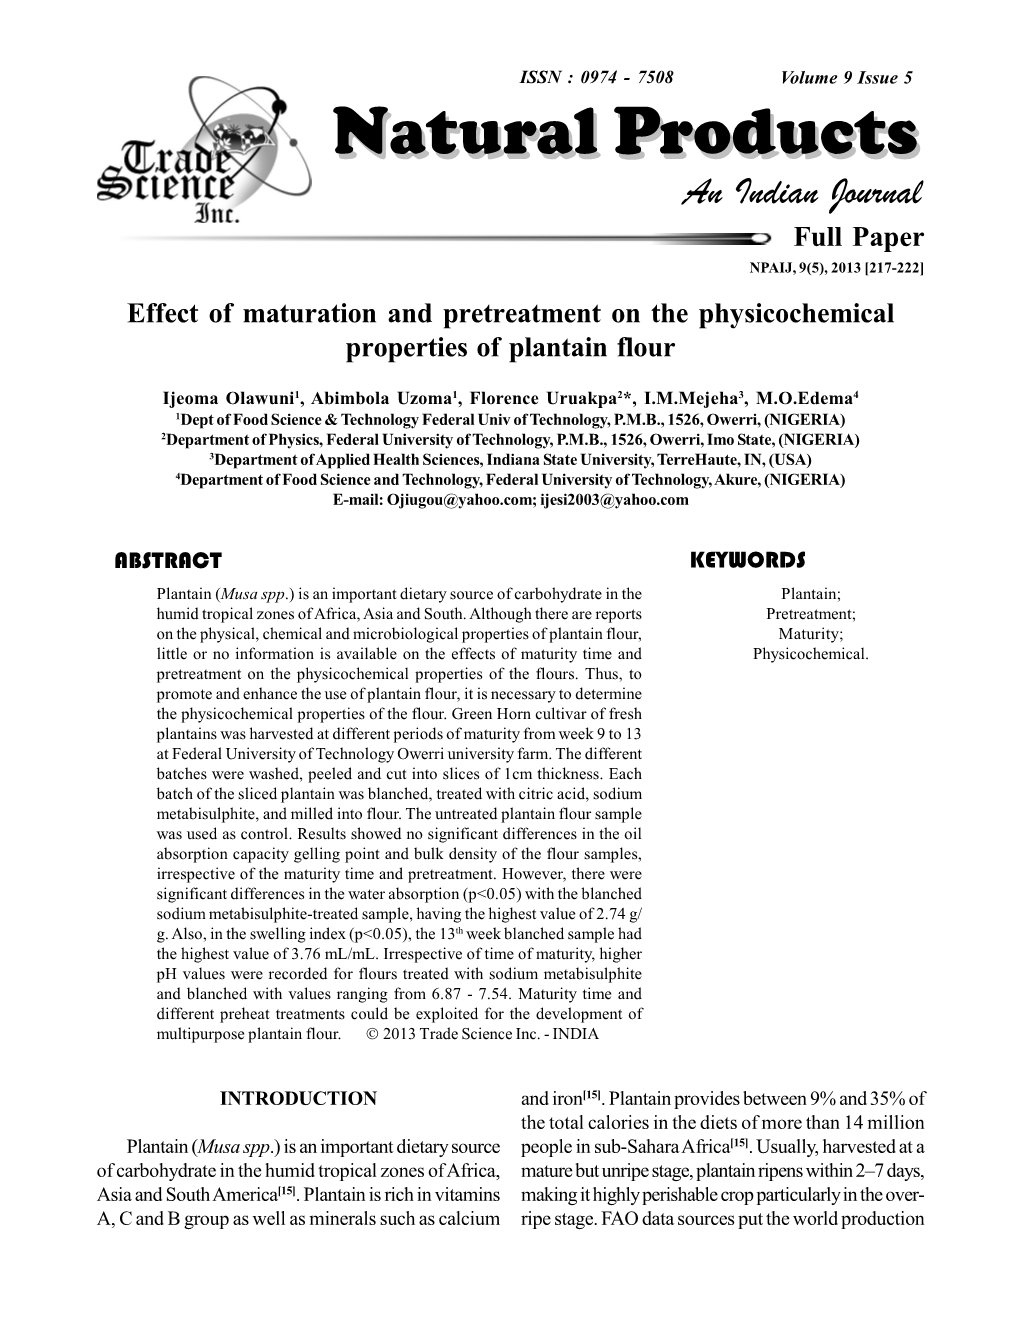 Effect of Maturation and Pretreatment on the Physicochemical Properties of Plantain Flour